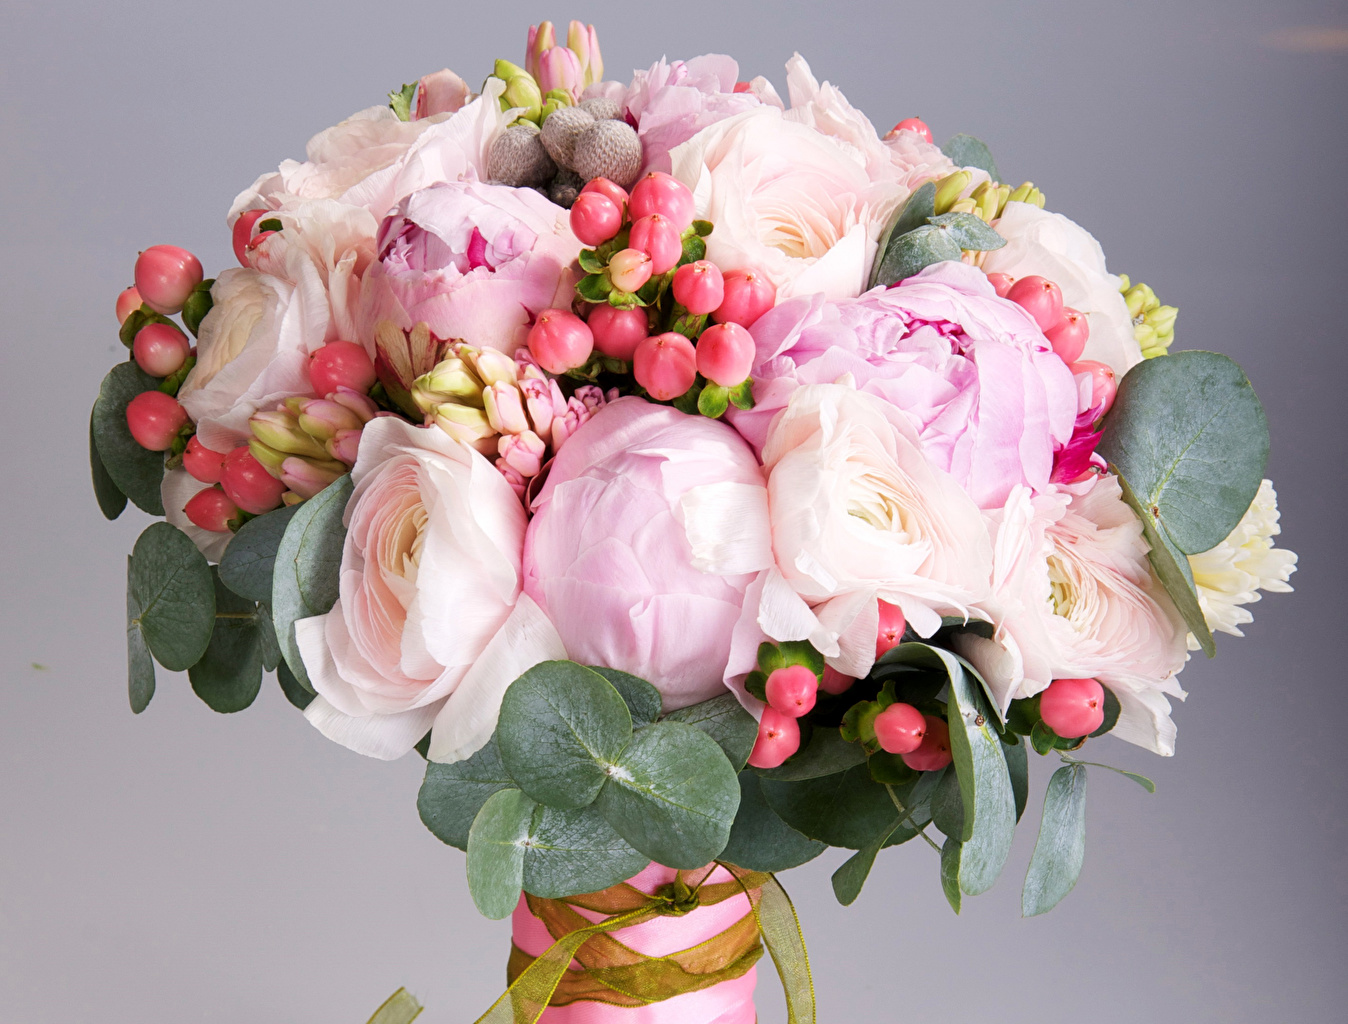 4K Bouquet Of Peonies Wallpapers High Quality | Download Free